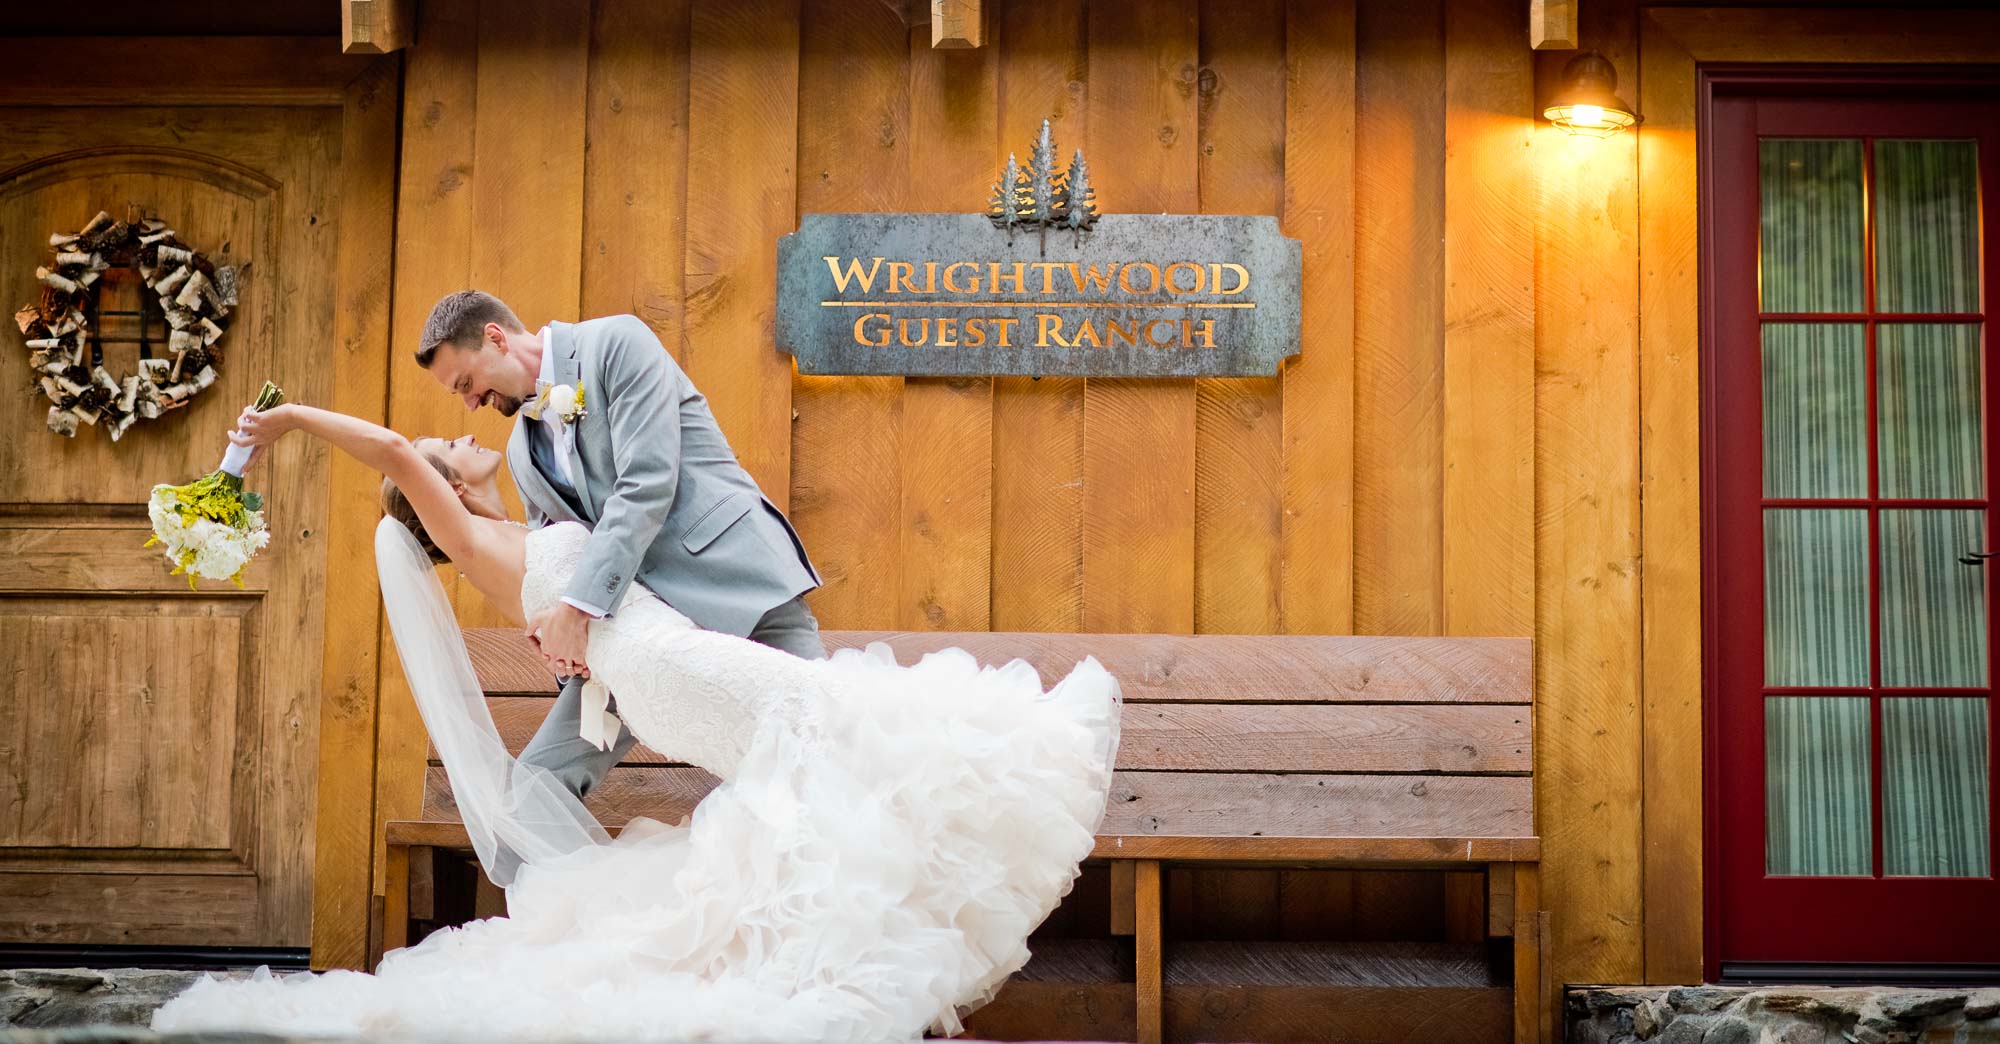 Amber & Daniel – Wrightwood Guest Ranch Wedding featured slider image